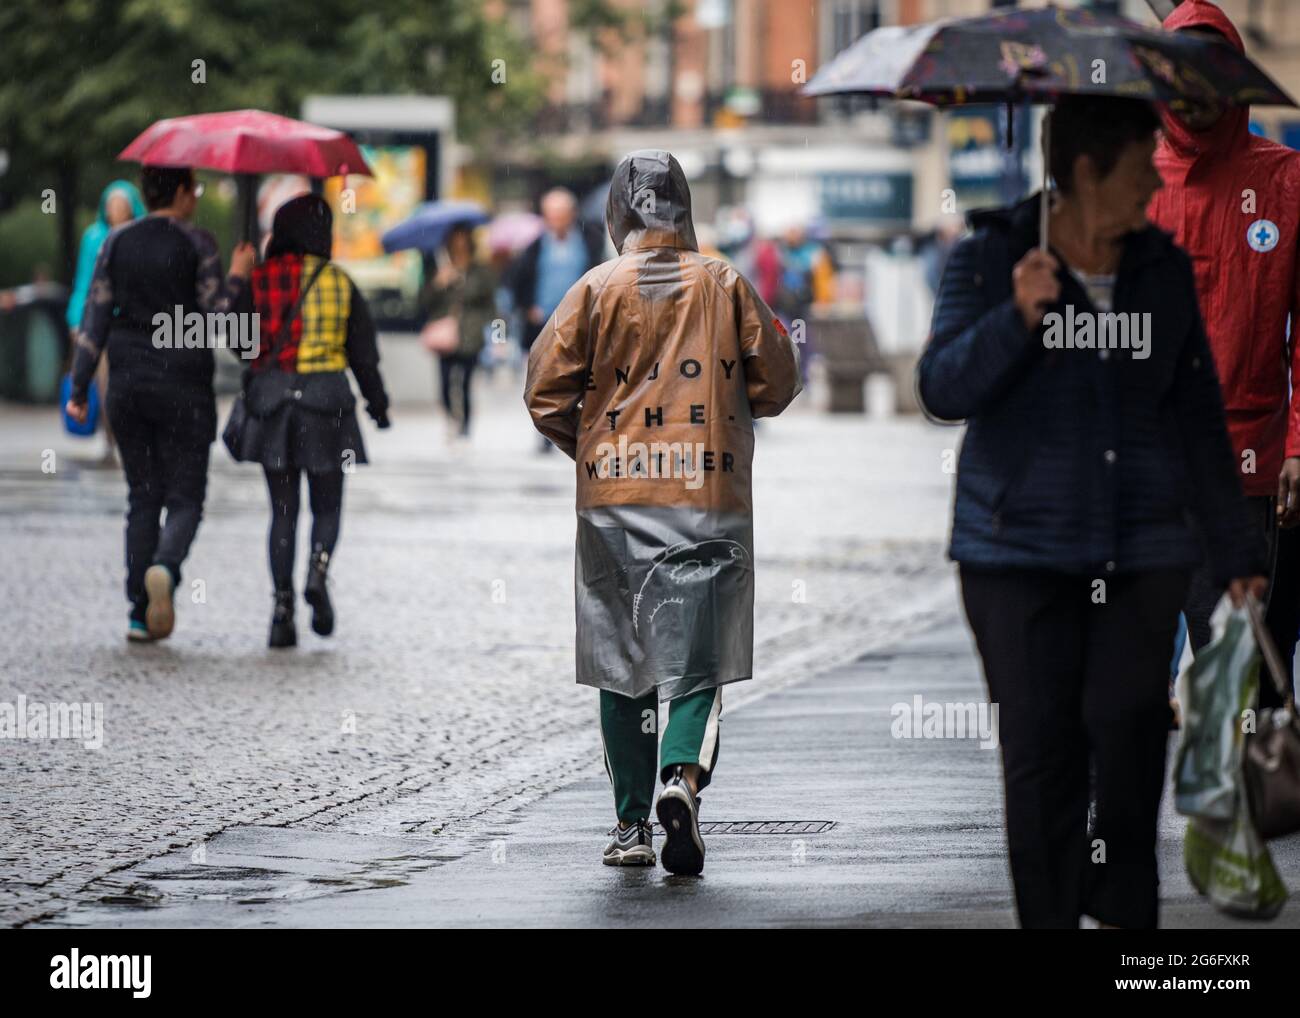 Enjoy the weather coat worn by high street shopper walking in depressing dark wet gloomy town centre.  Umbrellas and typical English summer weather Stock Photo